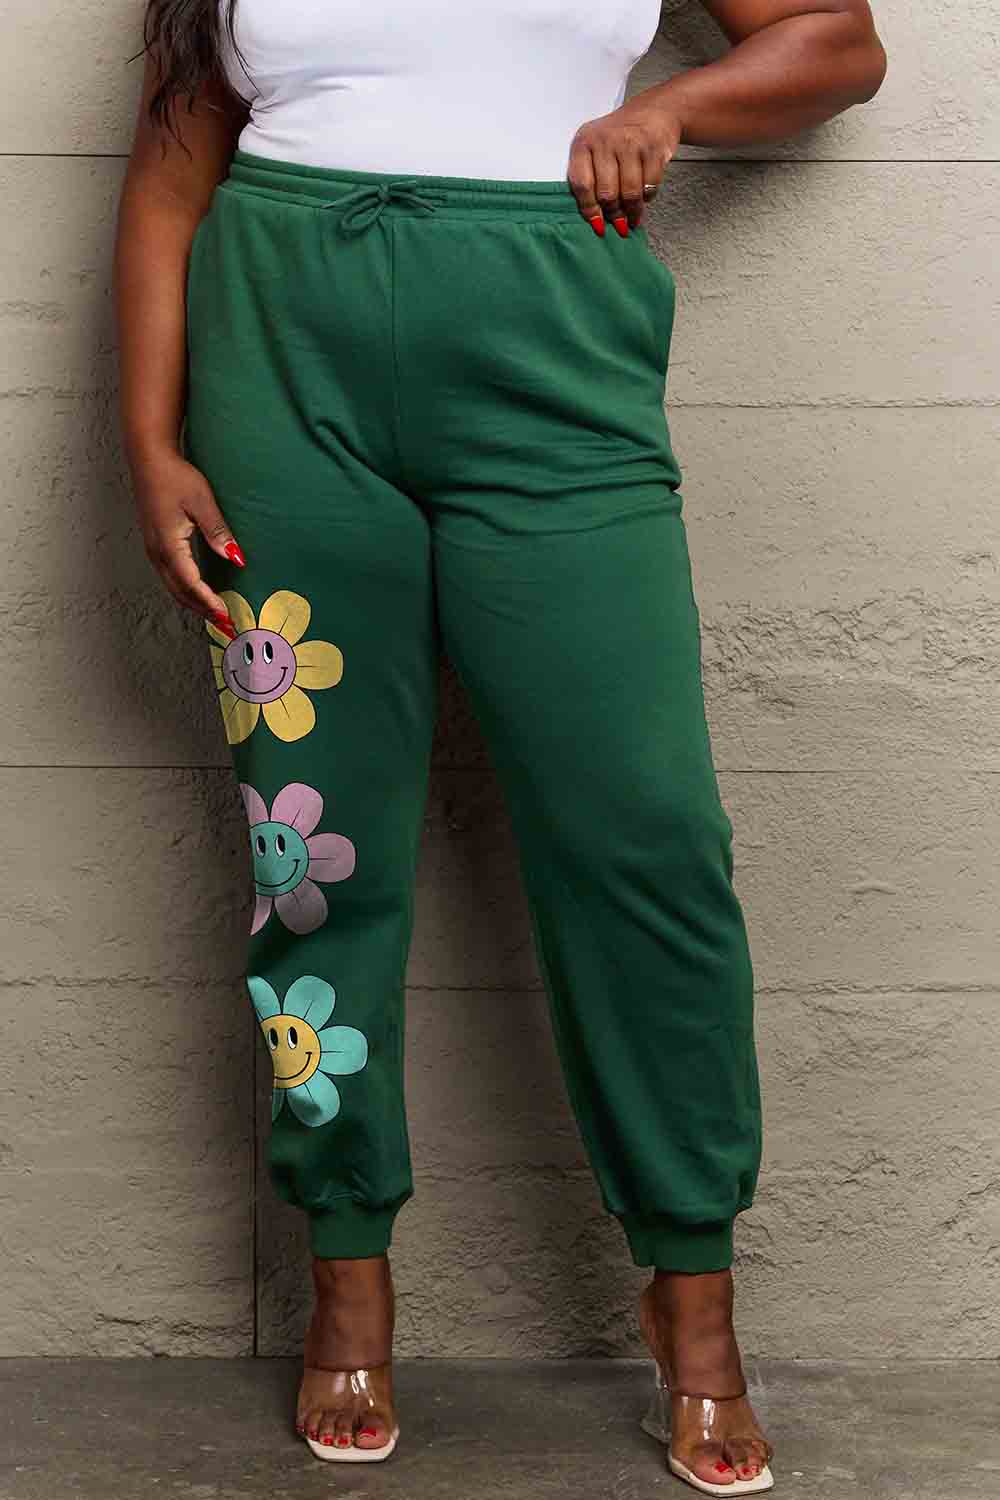 Simply Love - Everglade - Full Size Drawstring Daisy Flower Graphic Long Sweatpants Ti Amo I love you